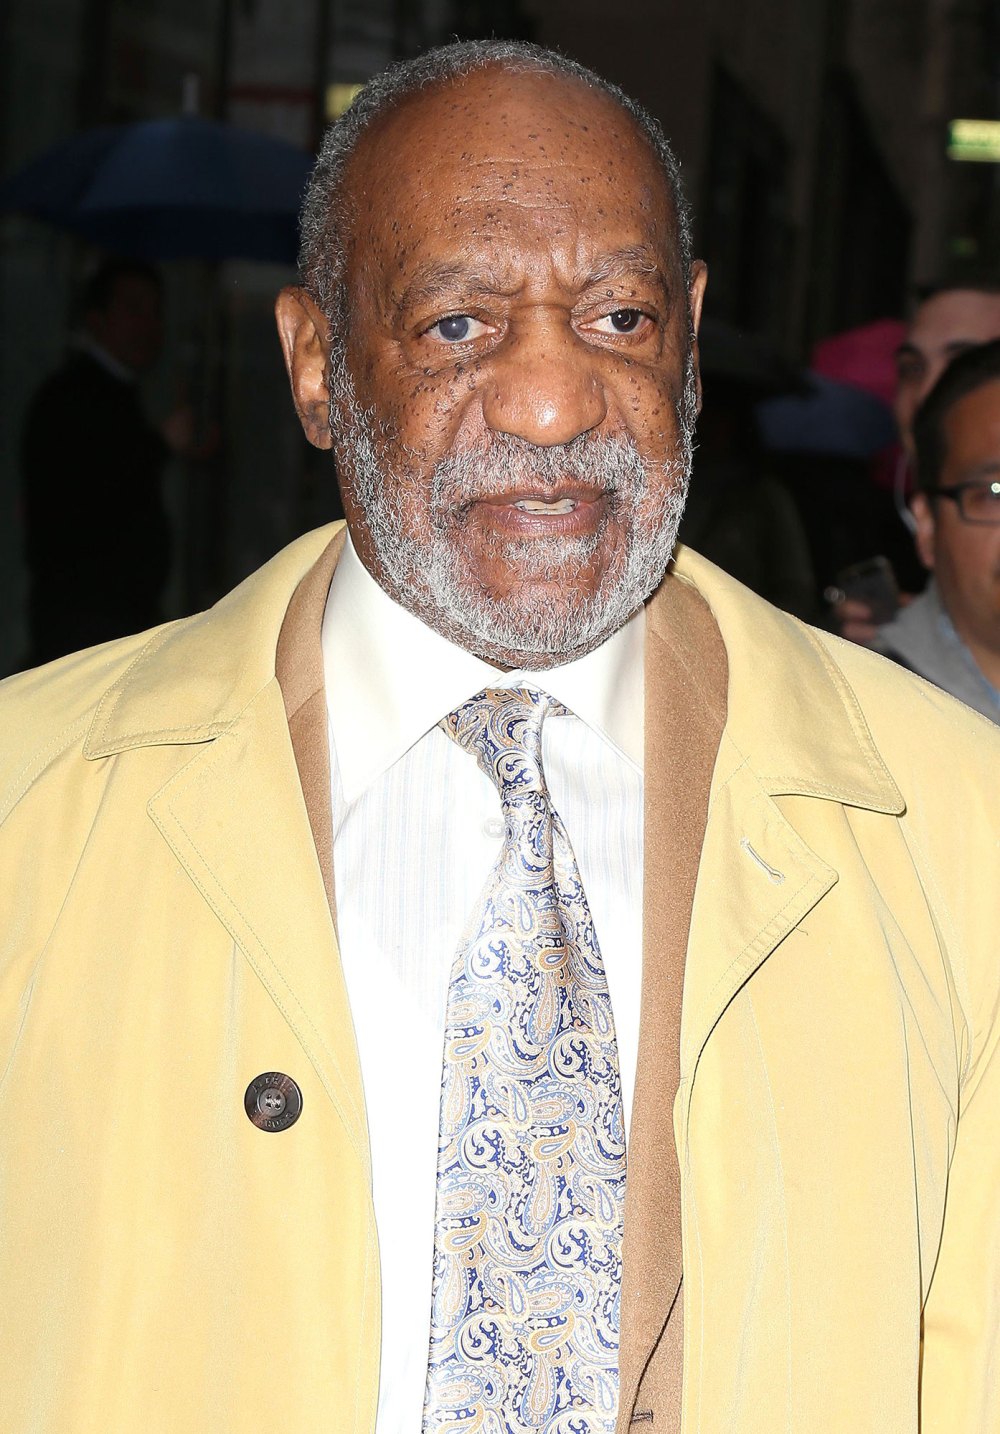 Bill Cosby Won’t “Dignify” Rape Allegations With a Comment, Lawyer Says